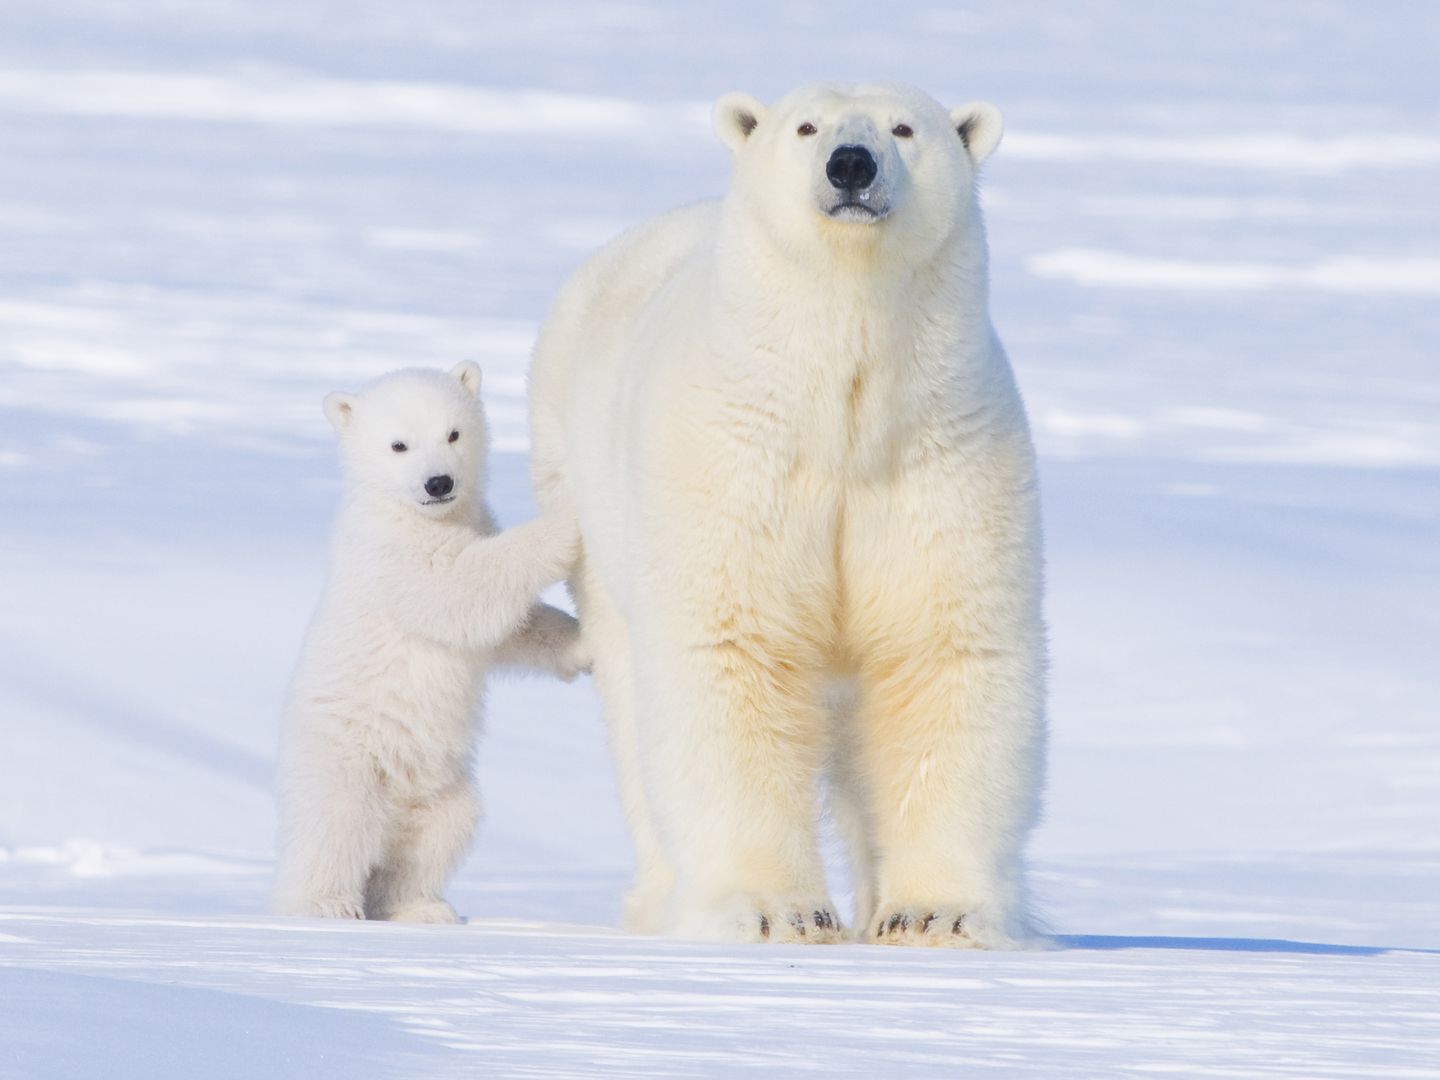 Polar bear survival threatened by emissions-driven climate change impact